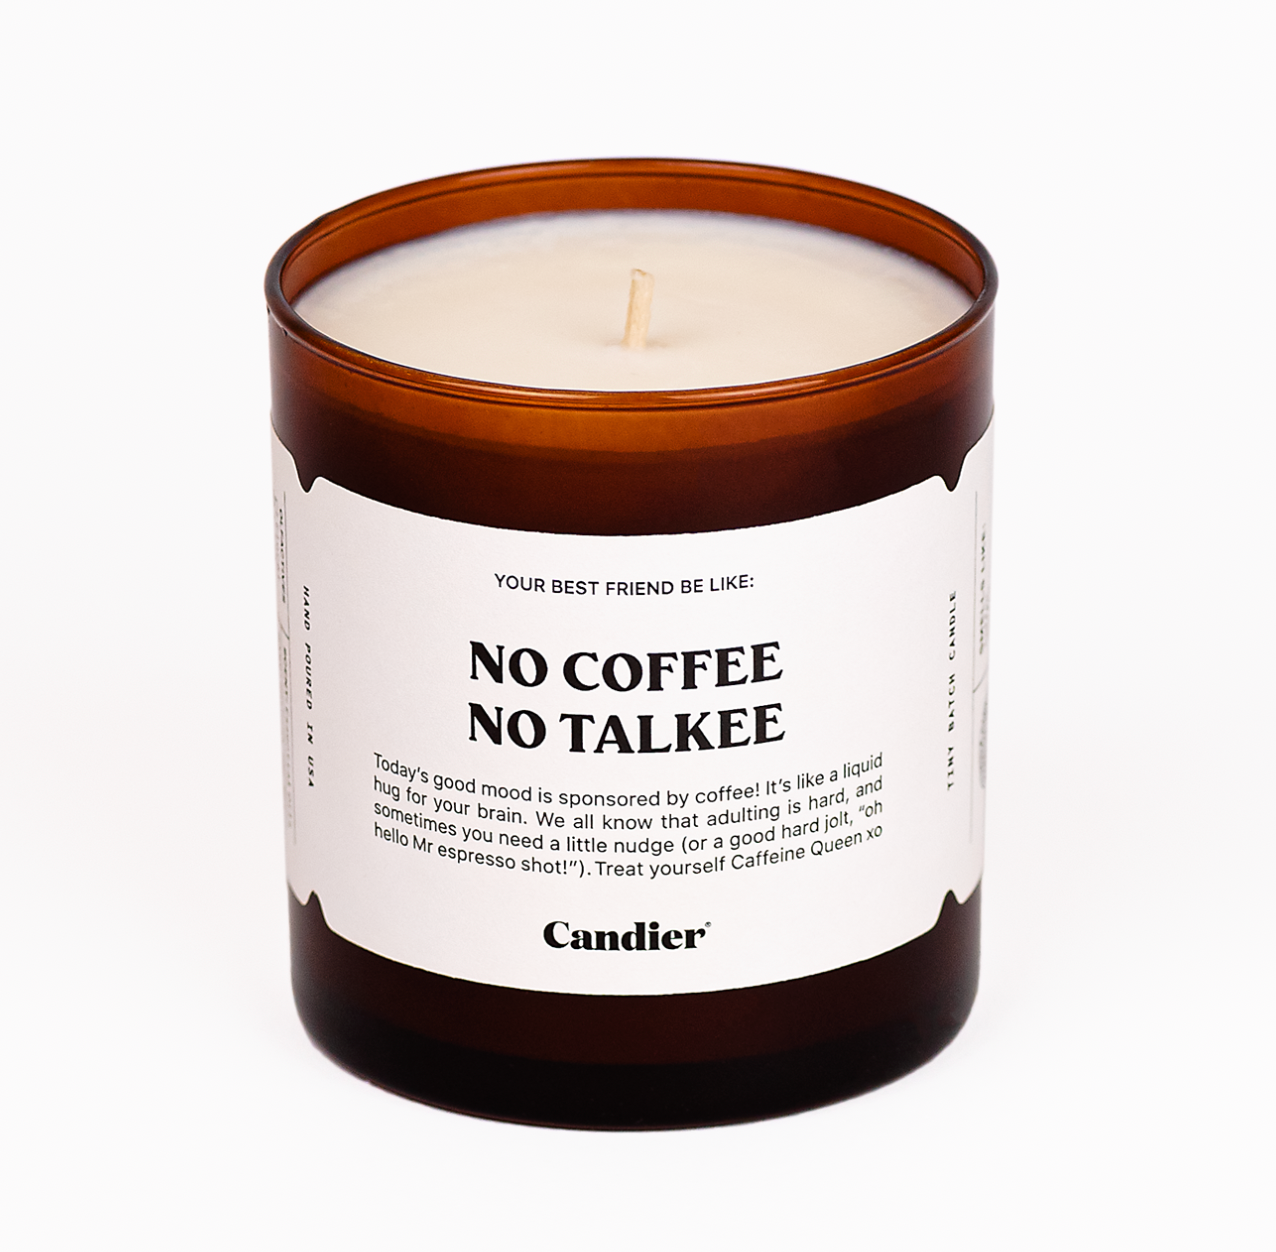 NO COFFEE CANDLE